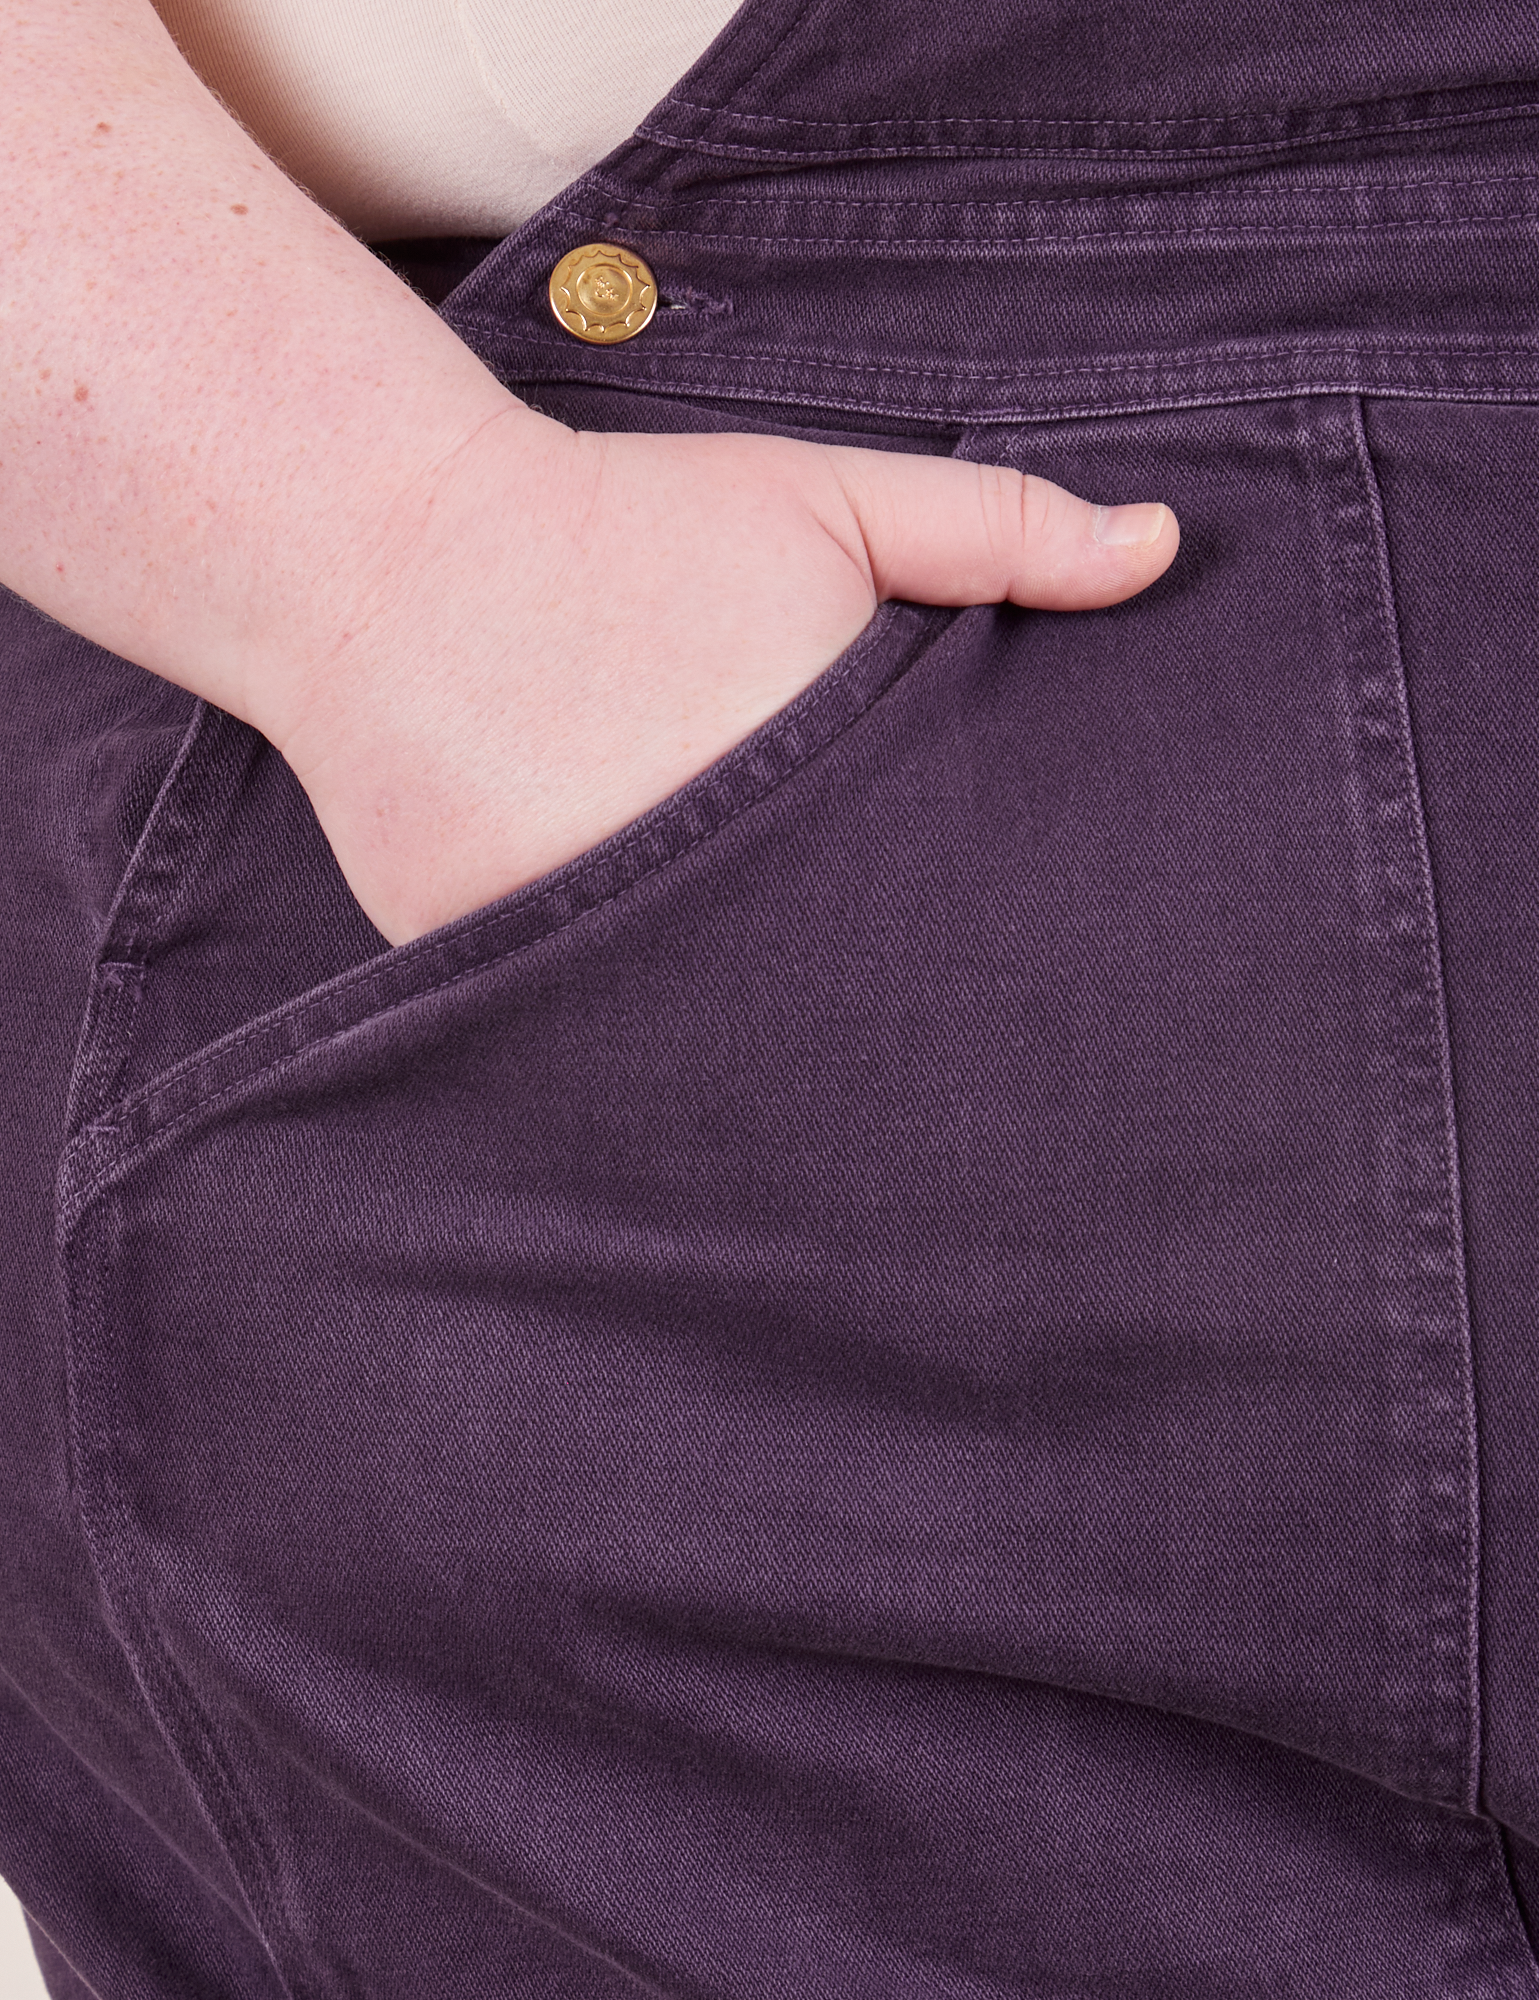 Front pocket close up of Original Overalls in Mono Nebula Purple. Catie has her hand in the pocket.